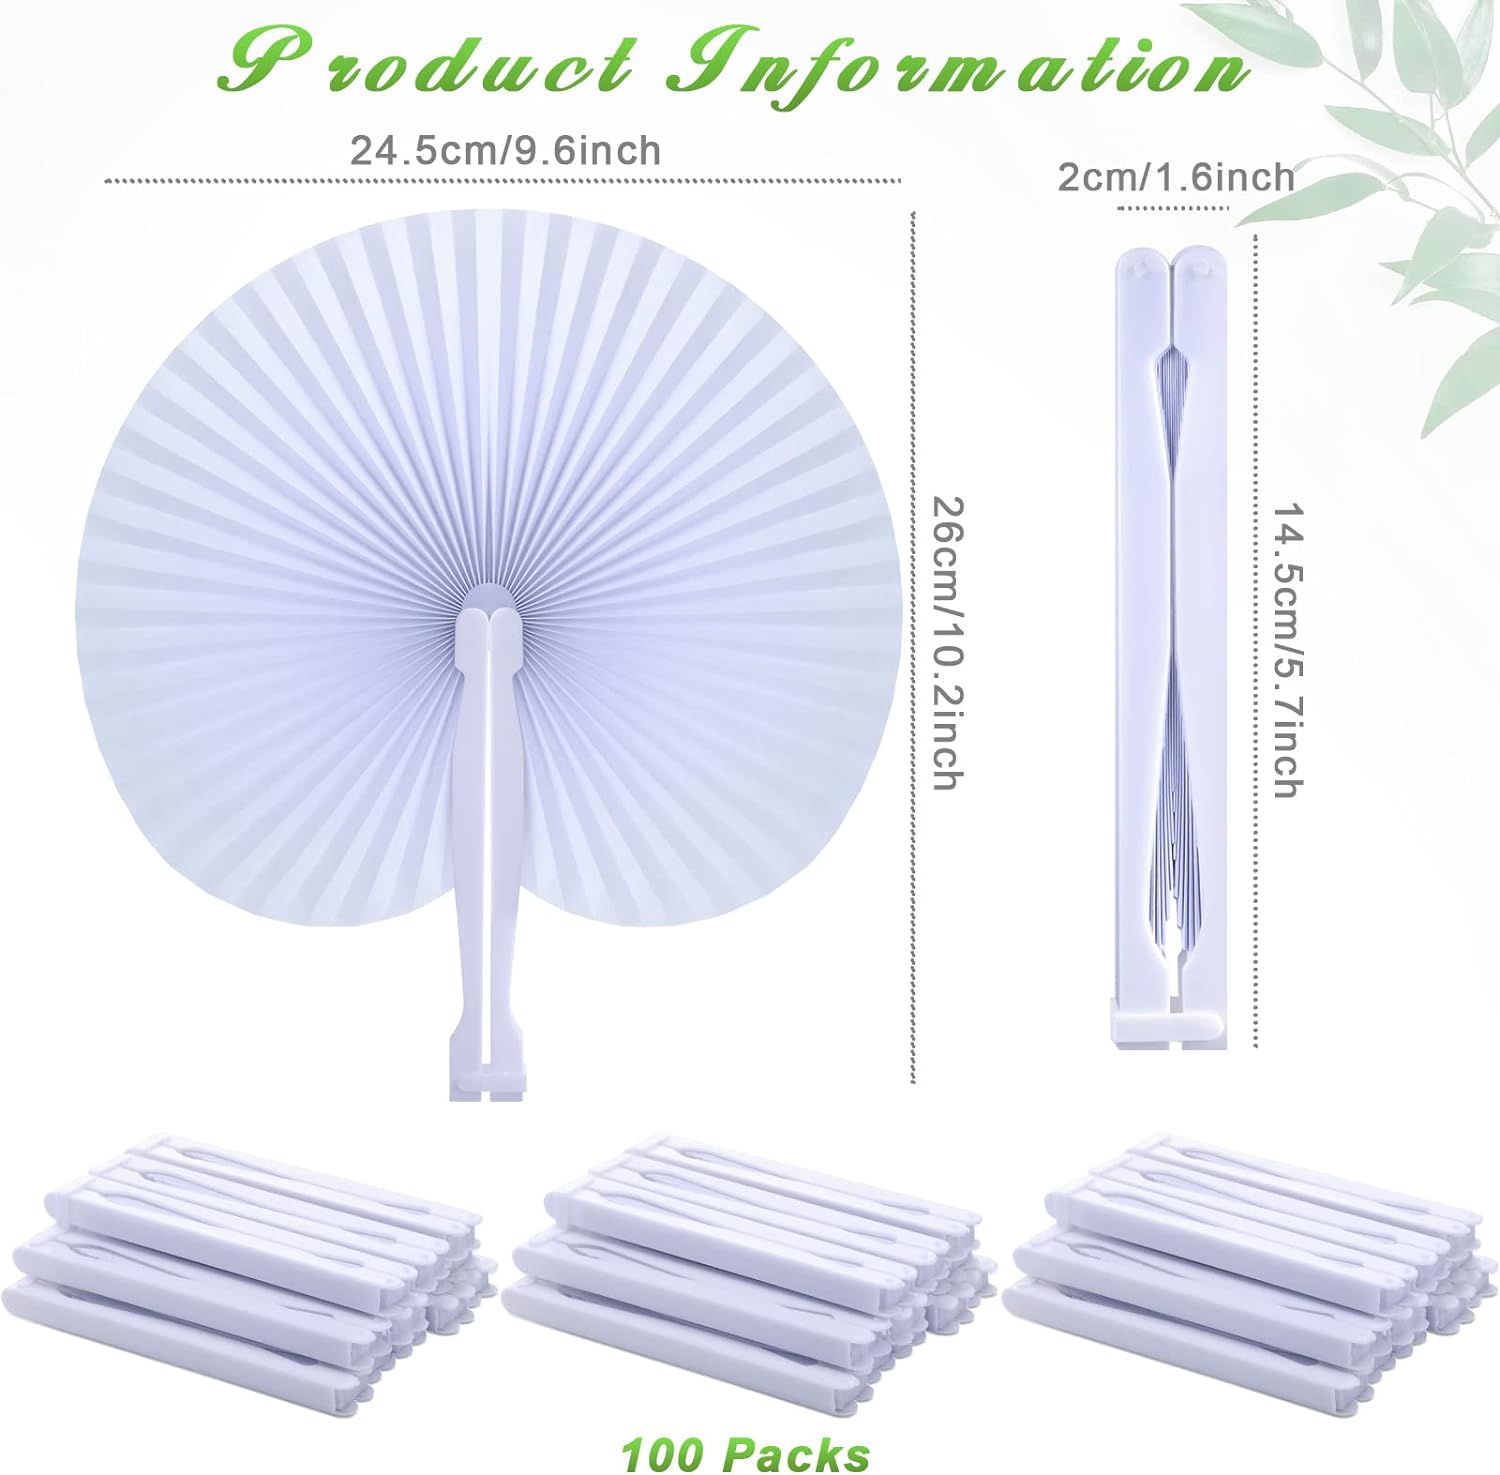 Bulk 100 Pcs White Paper Fans Round Folding Wedding Fans with Plastic Handle for Guests Birthday Party Favors for Men and Women Wholesale